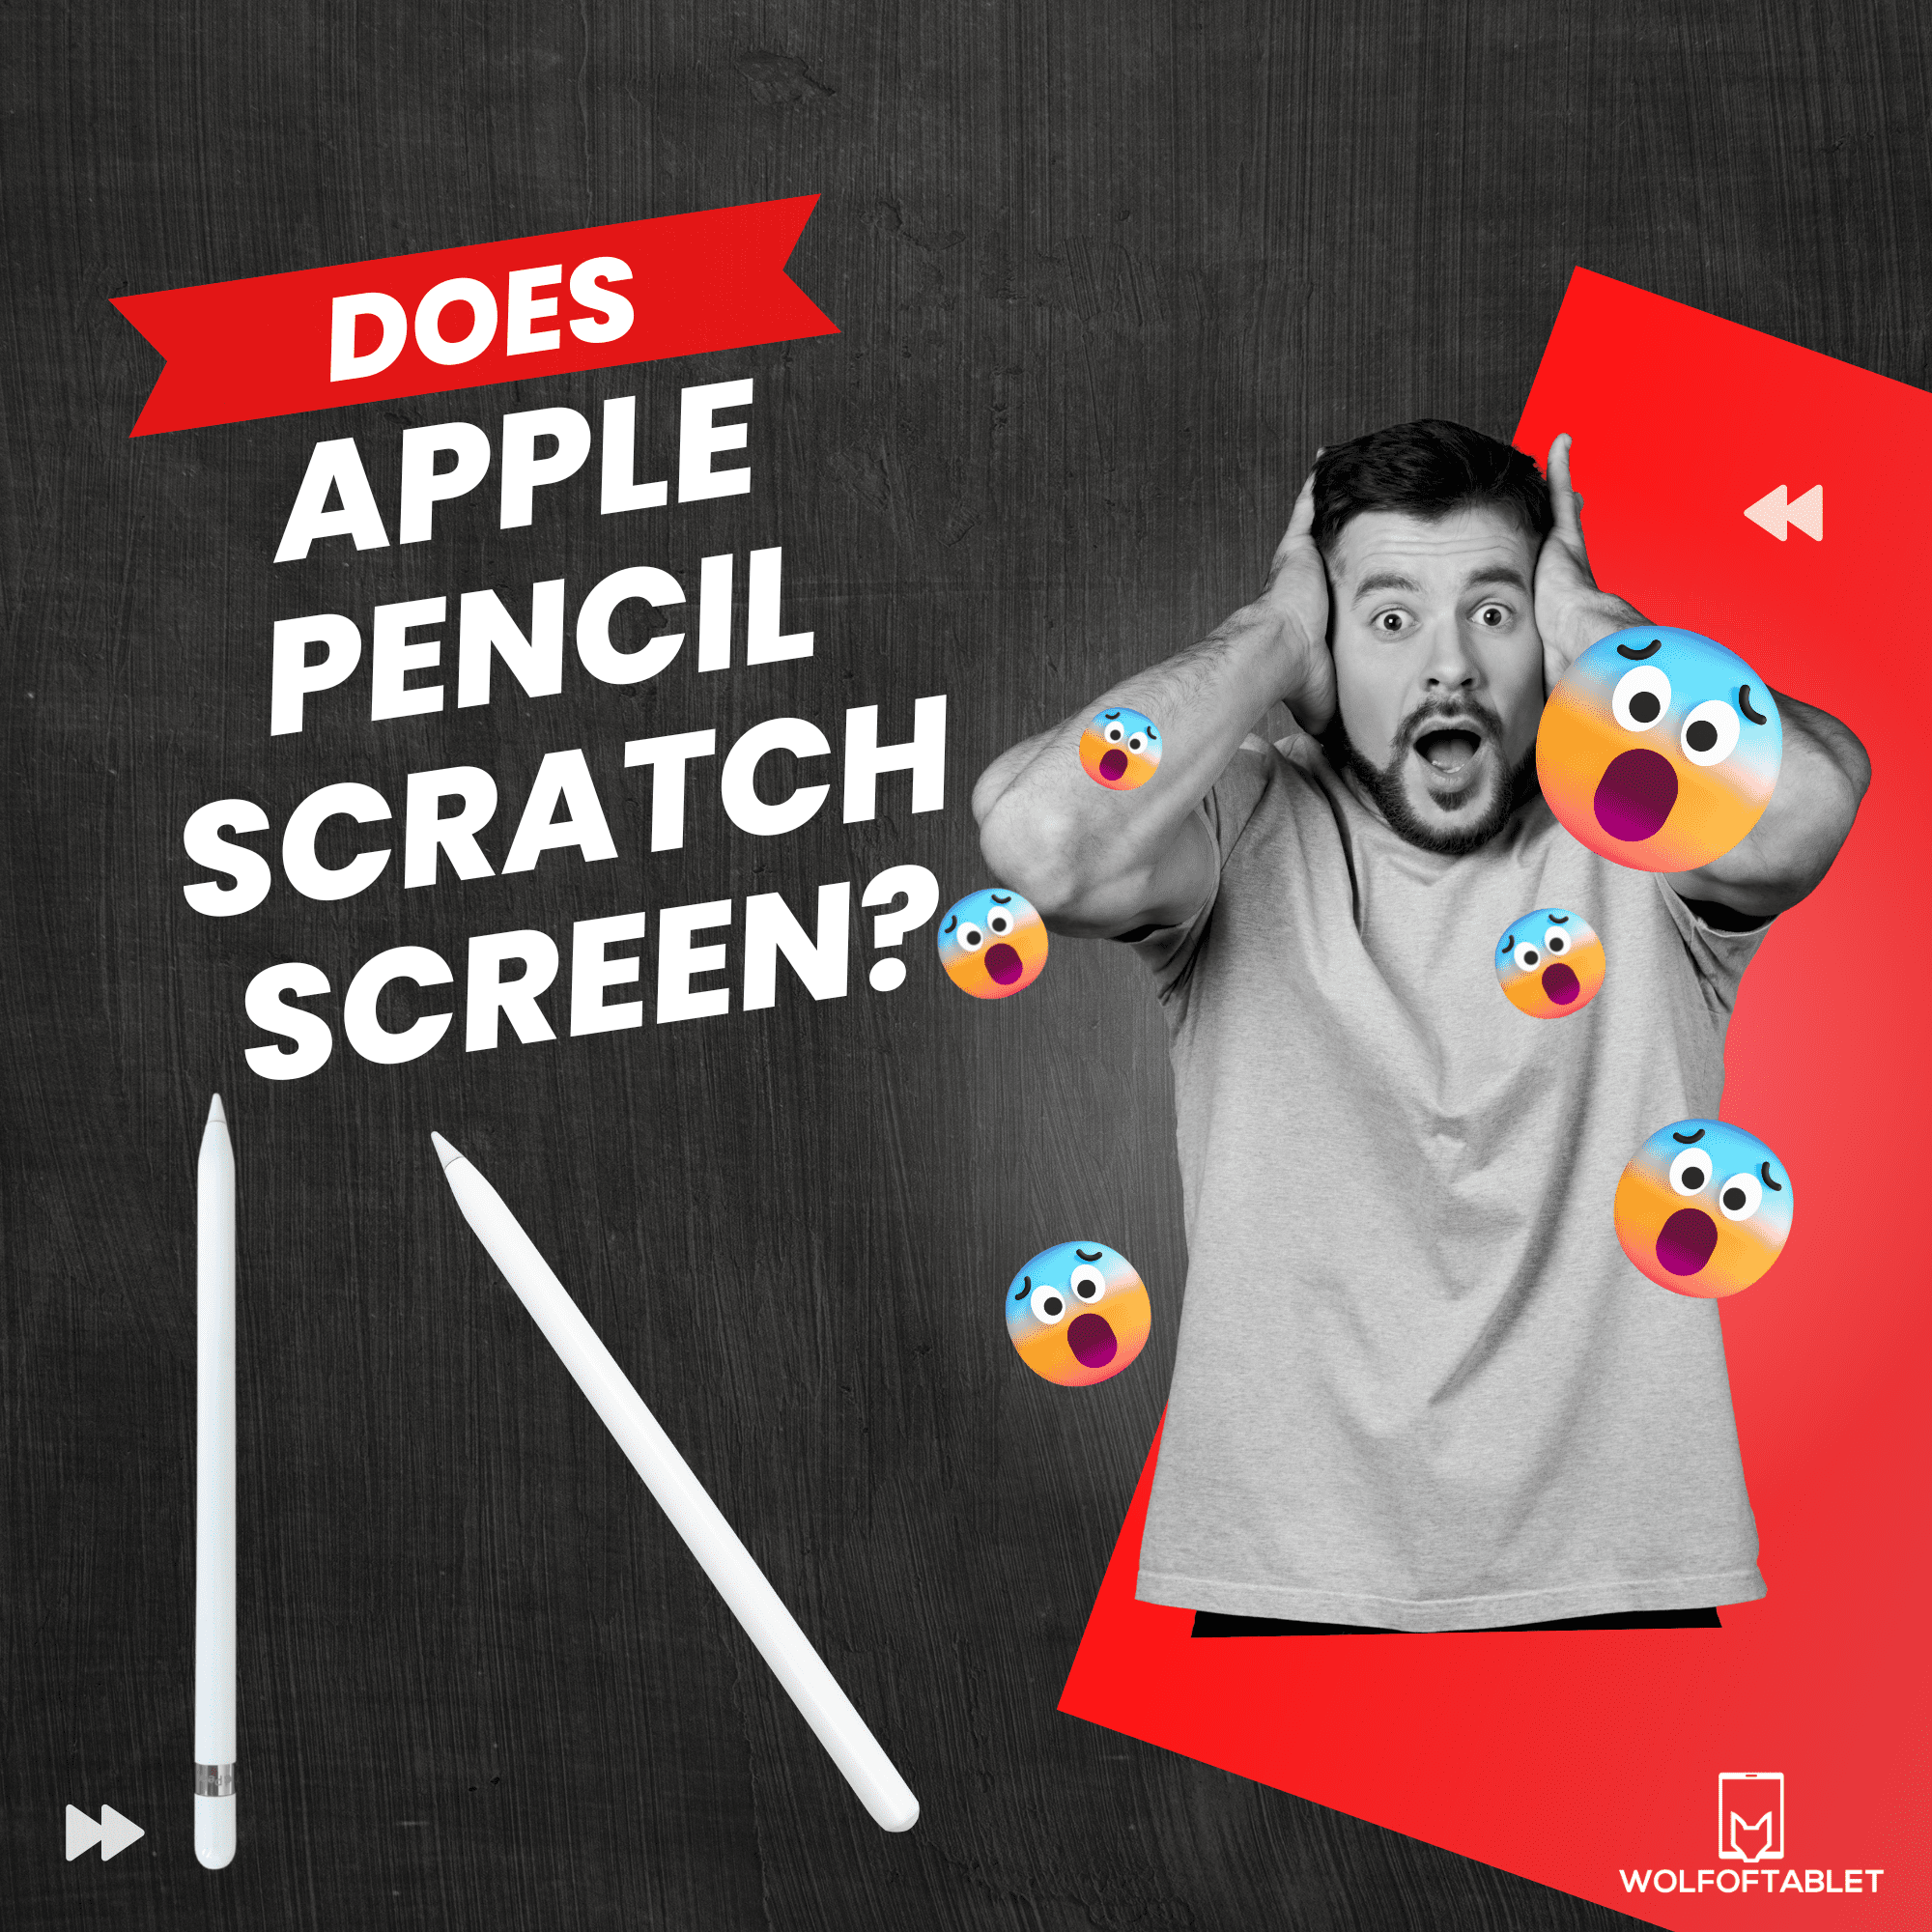 does apple pencil scratch screen - answered